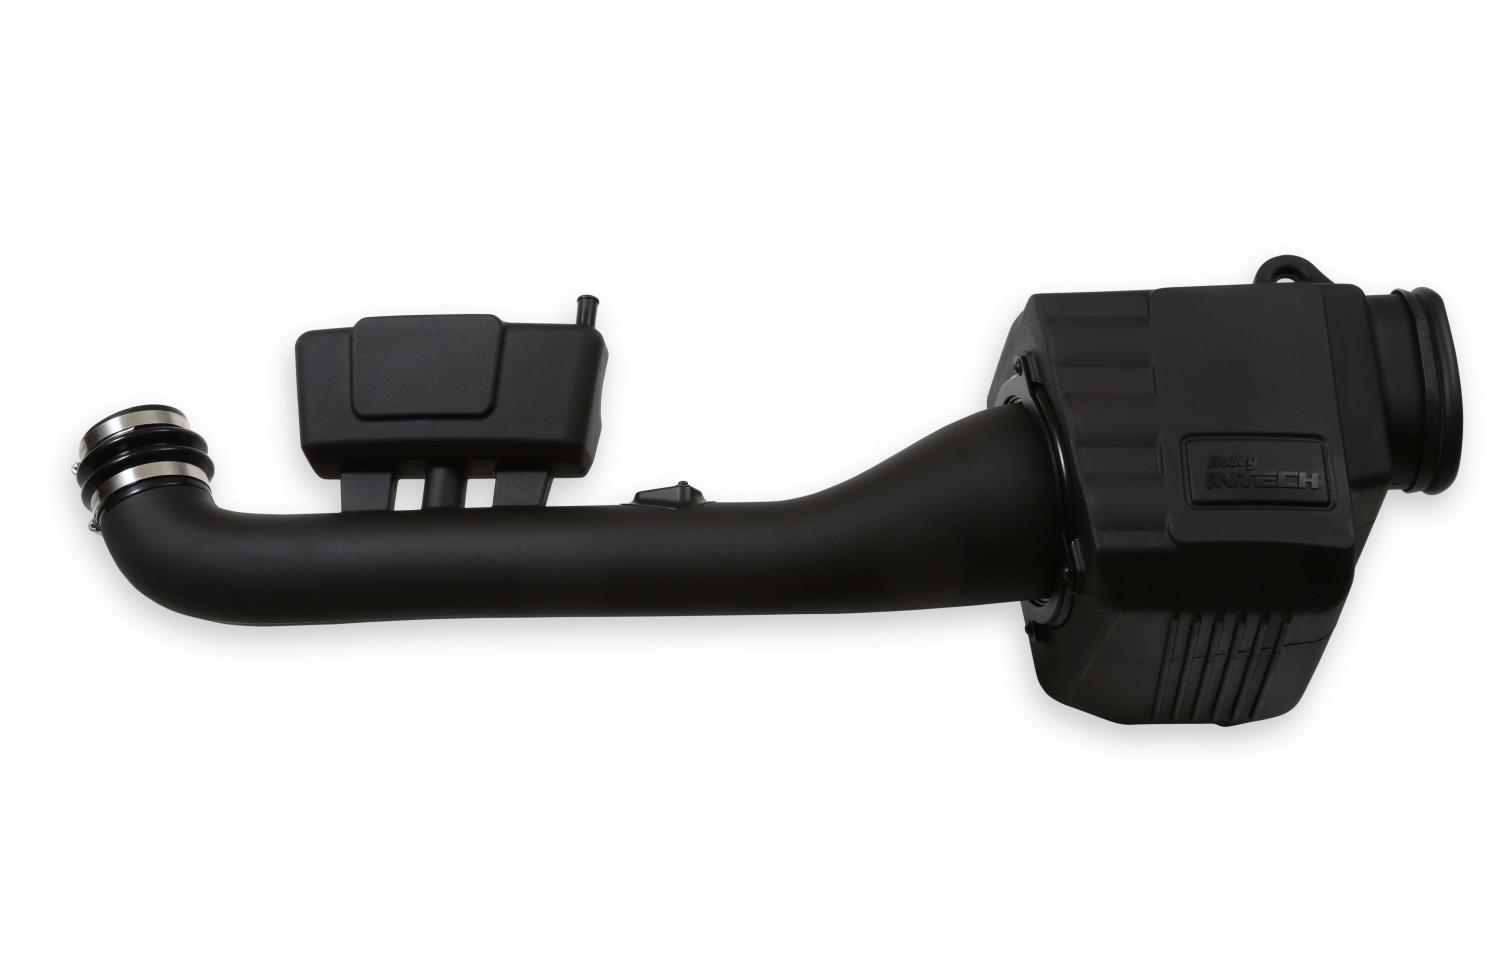 iNTECH Cold Air Intake Fits Nissan Frontier, Pathfinder, Xterra 4.0L V6 [Select 2005-2019 Models]